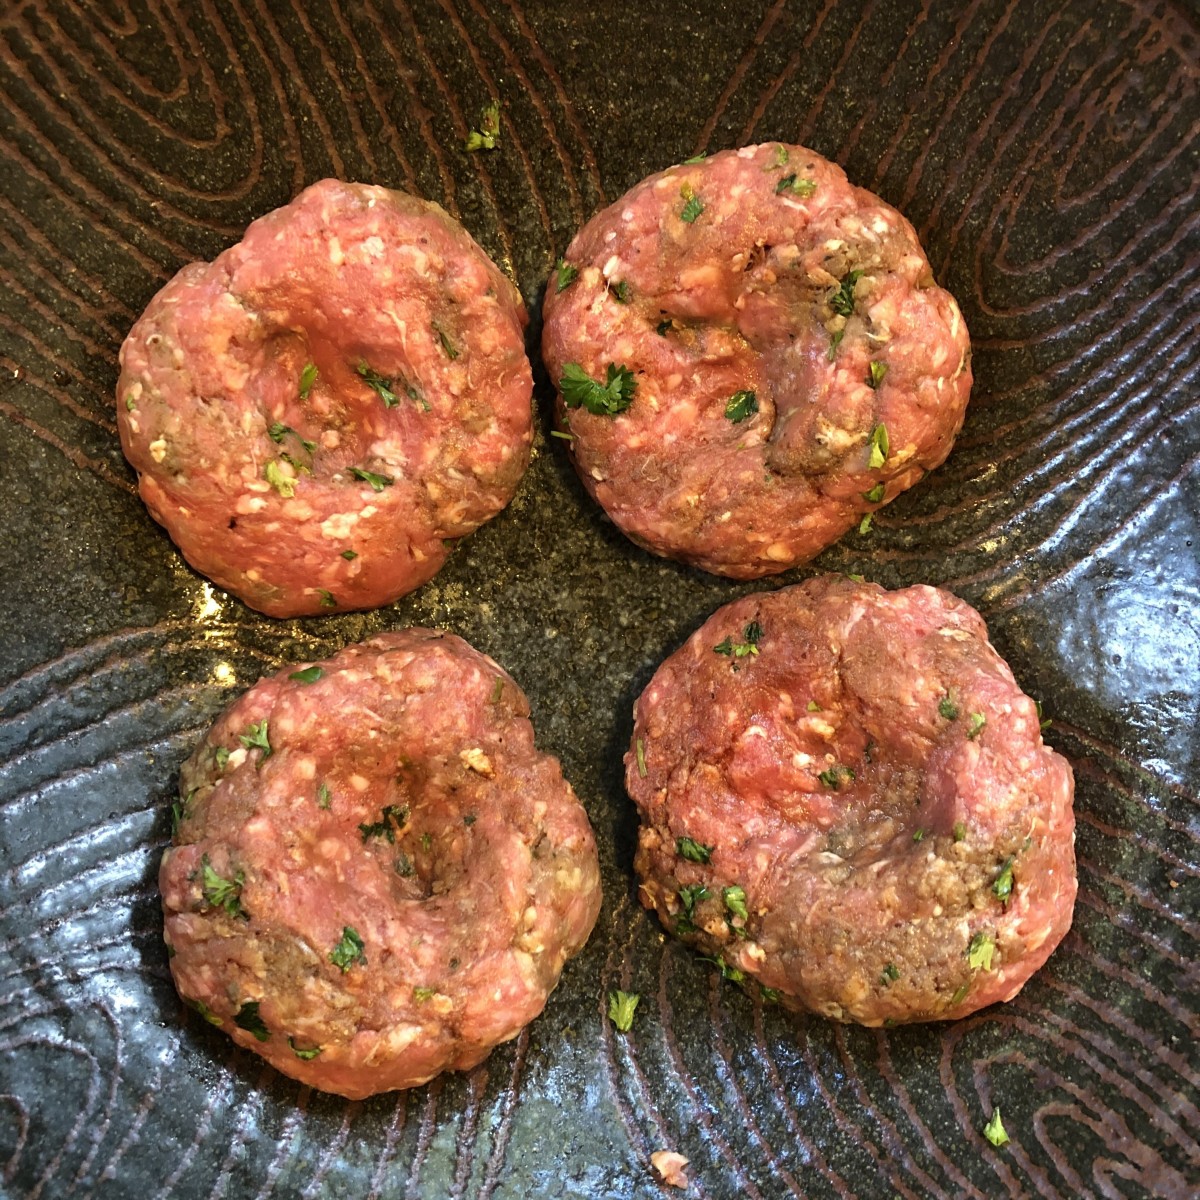 Take time to form the patties to make sure they're all the same size and shape and compact enough to hold together. Indent each burger for better cooking.